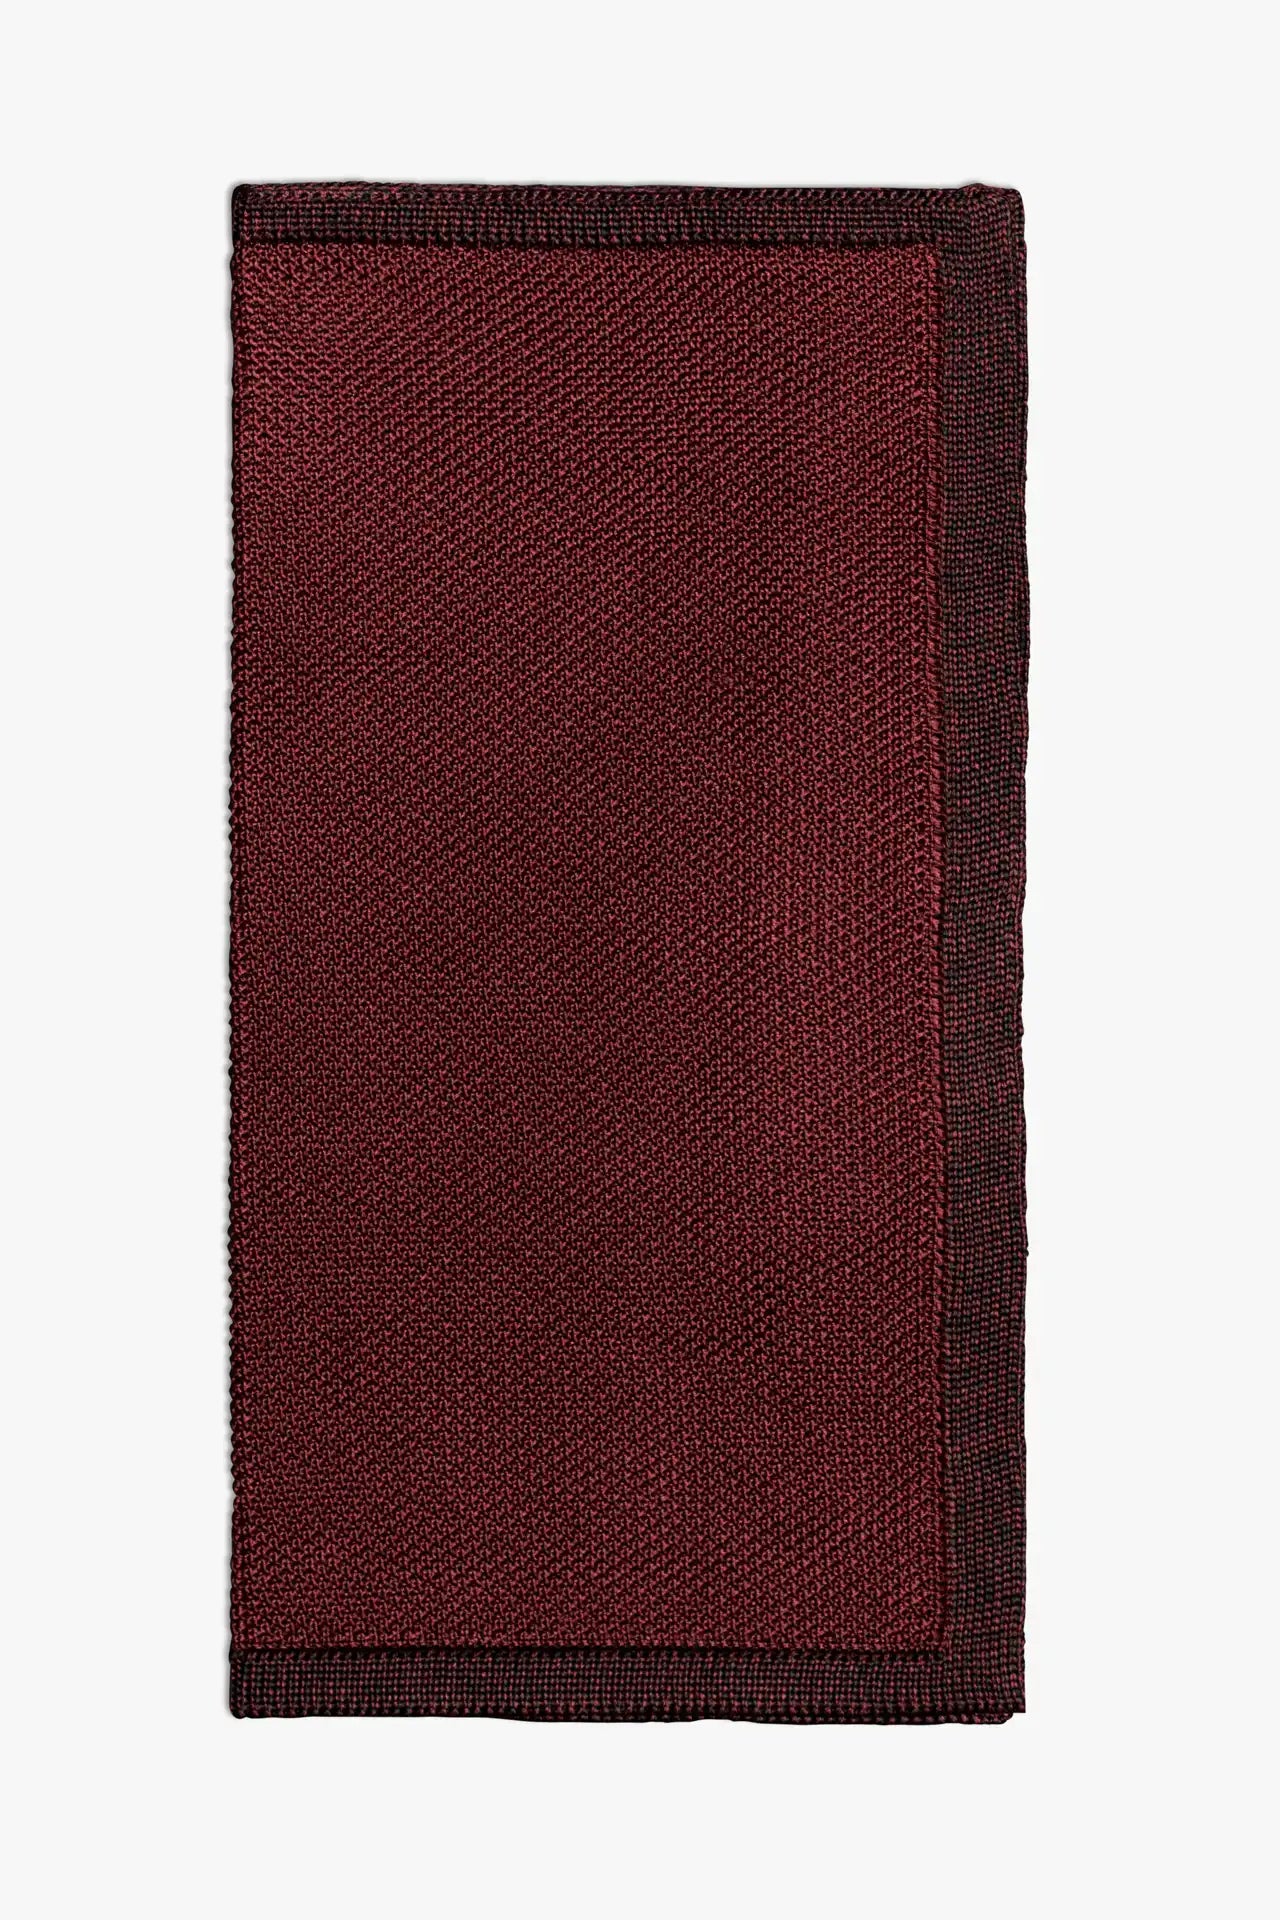 Maroon red melange pocket square in silk made in Italy